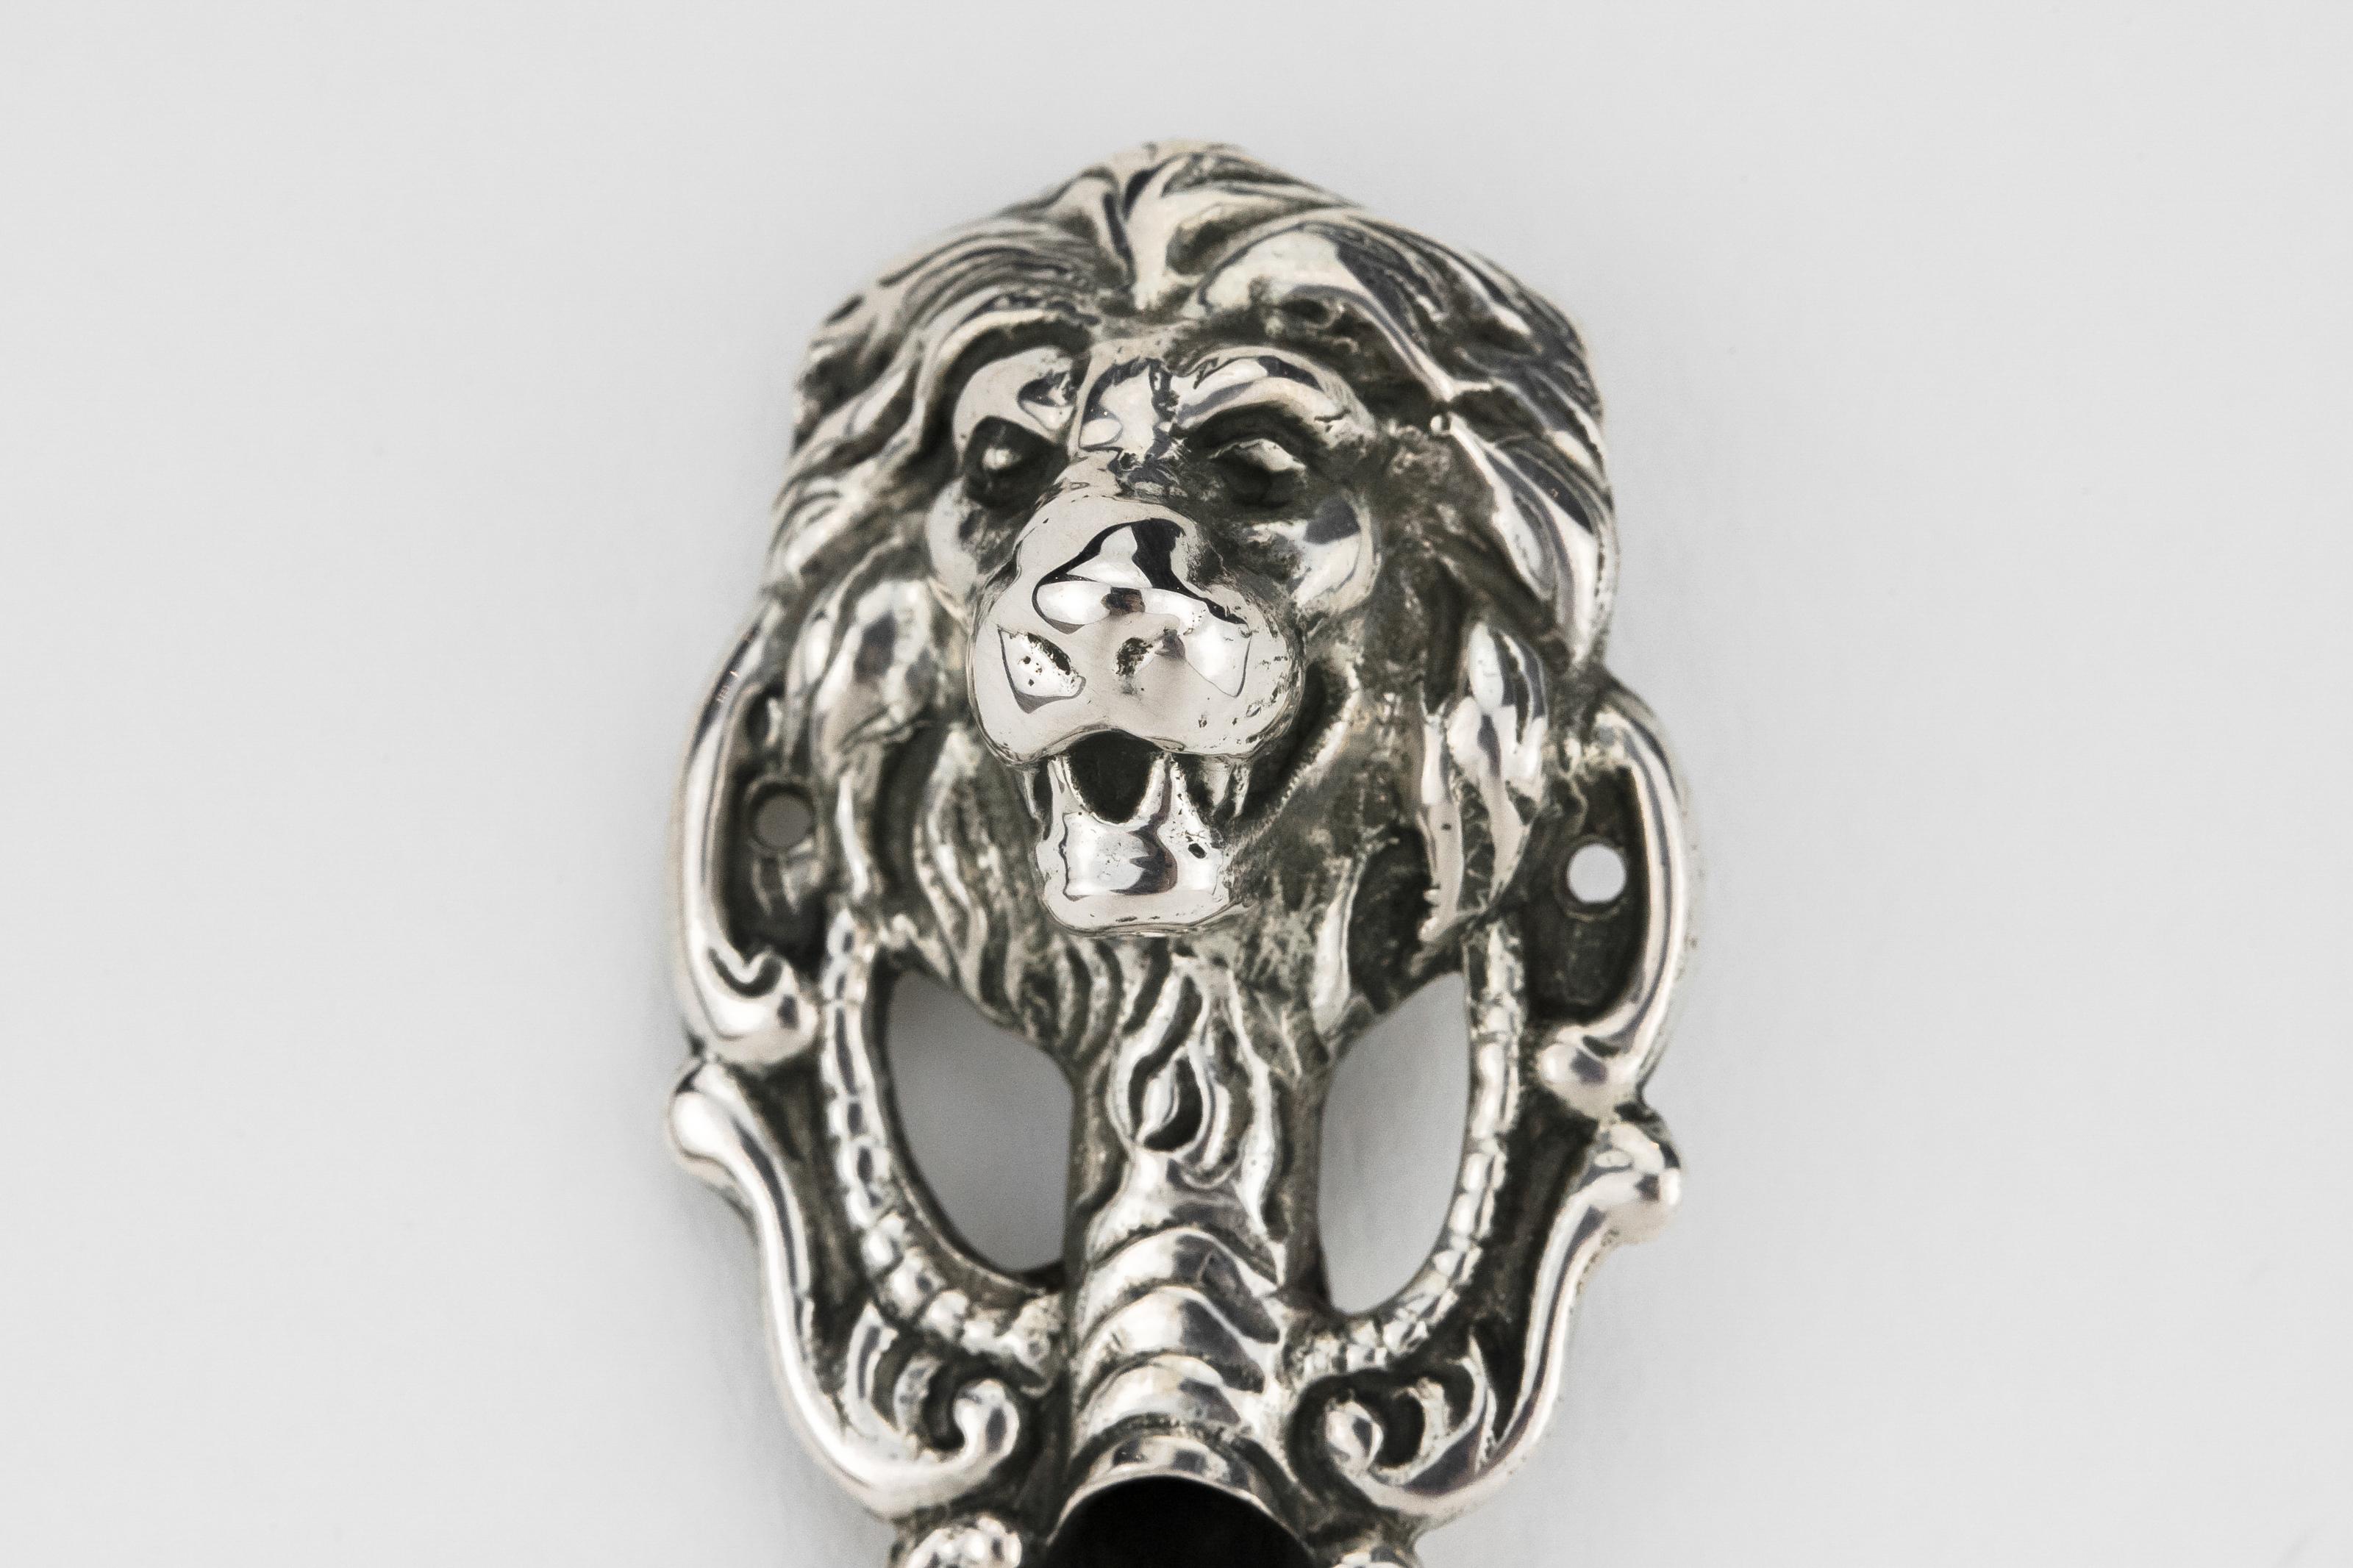 Silver Mezuzah by Adolf Mayer, Germany, circa 1890.
Decorated with a bolt lion head on the top, skin fish design on the midsection, and flowers at the bottom. Marked on the back with German silver hallmarks and with the maker's mark.

The Mezuzah